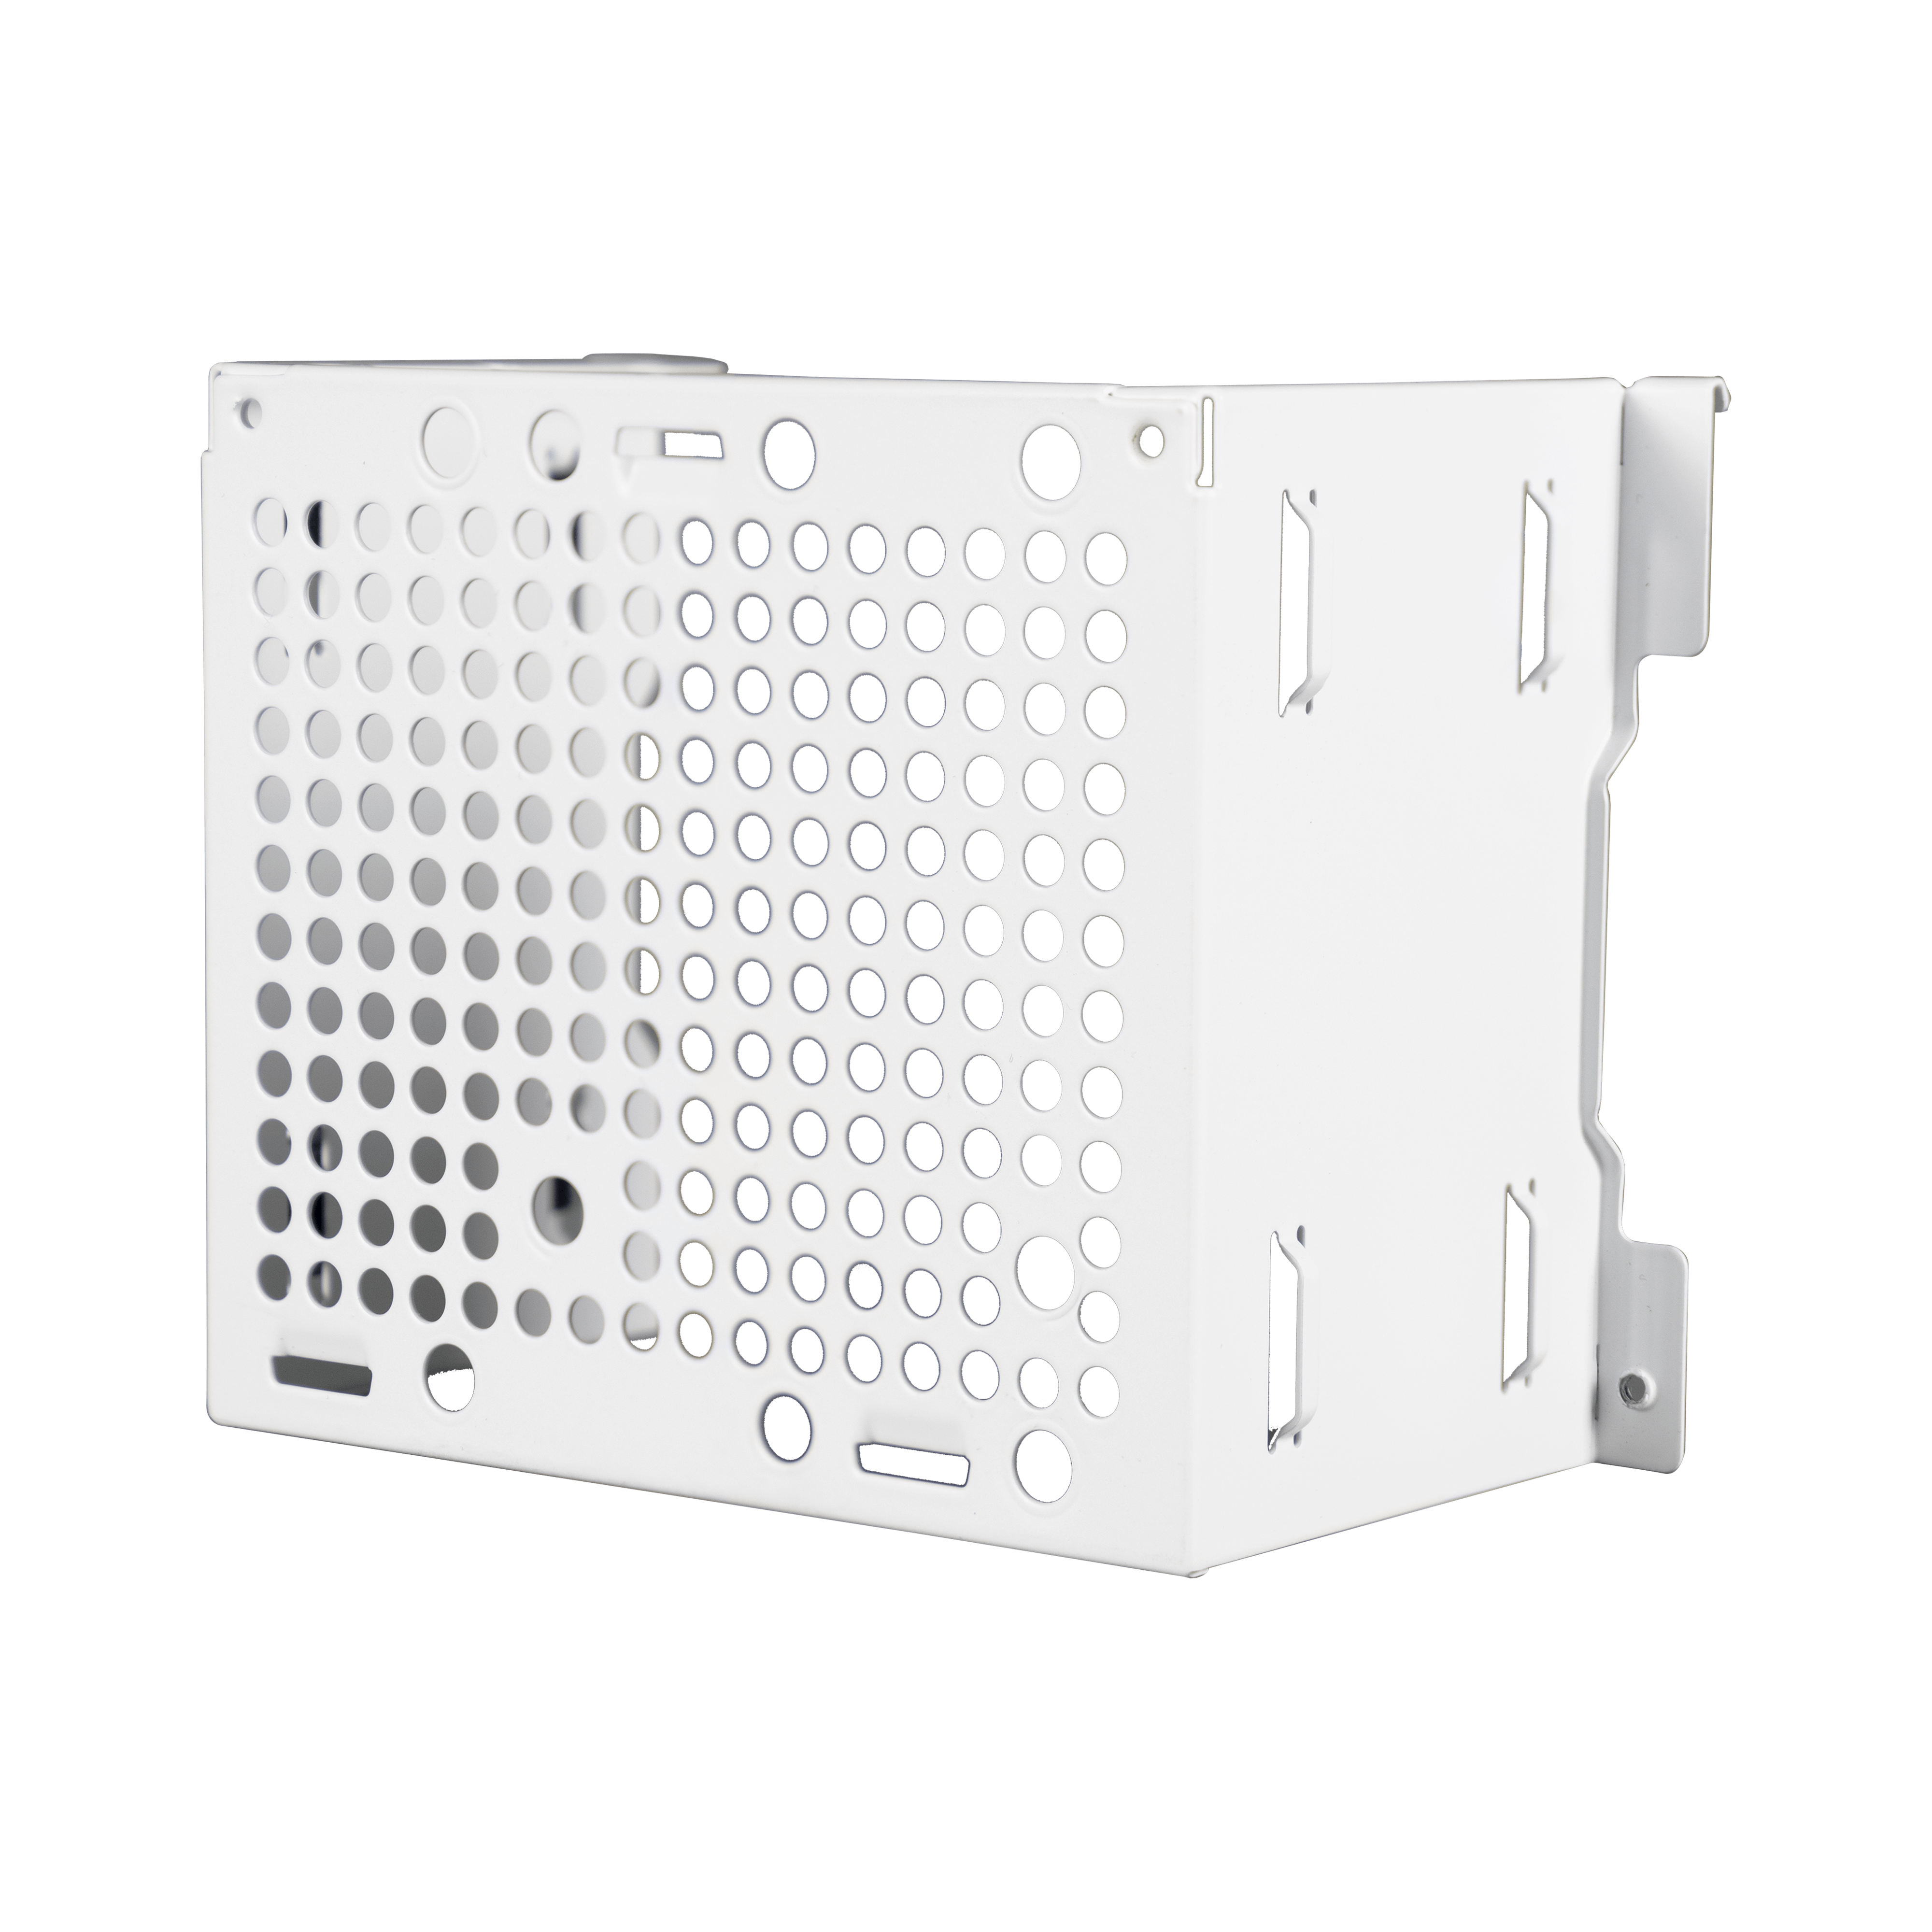 Cooler Master NR200 SFF Small Form Factor Mini-ITX Case, Vented Panels,  Triple-slot GPU, Tool-Free, 1x 120mm Fan, 1x 92mm, 360 Degree Accessibility